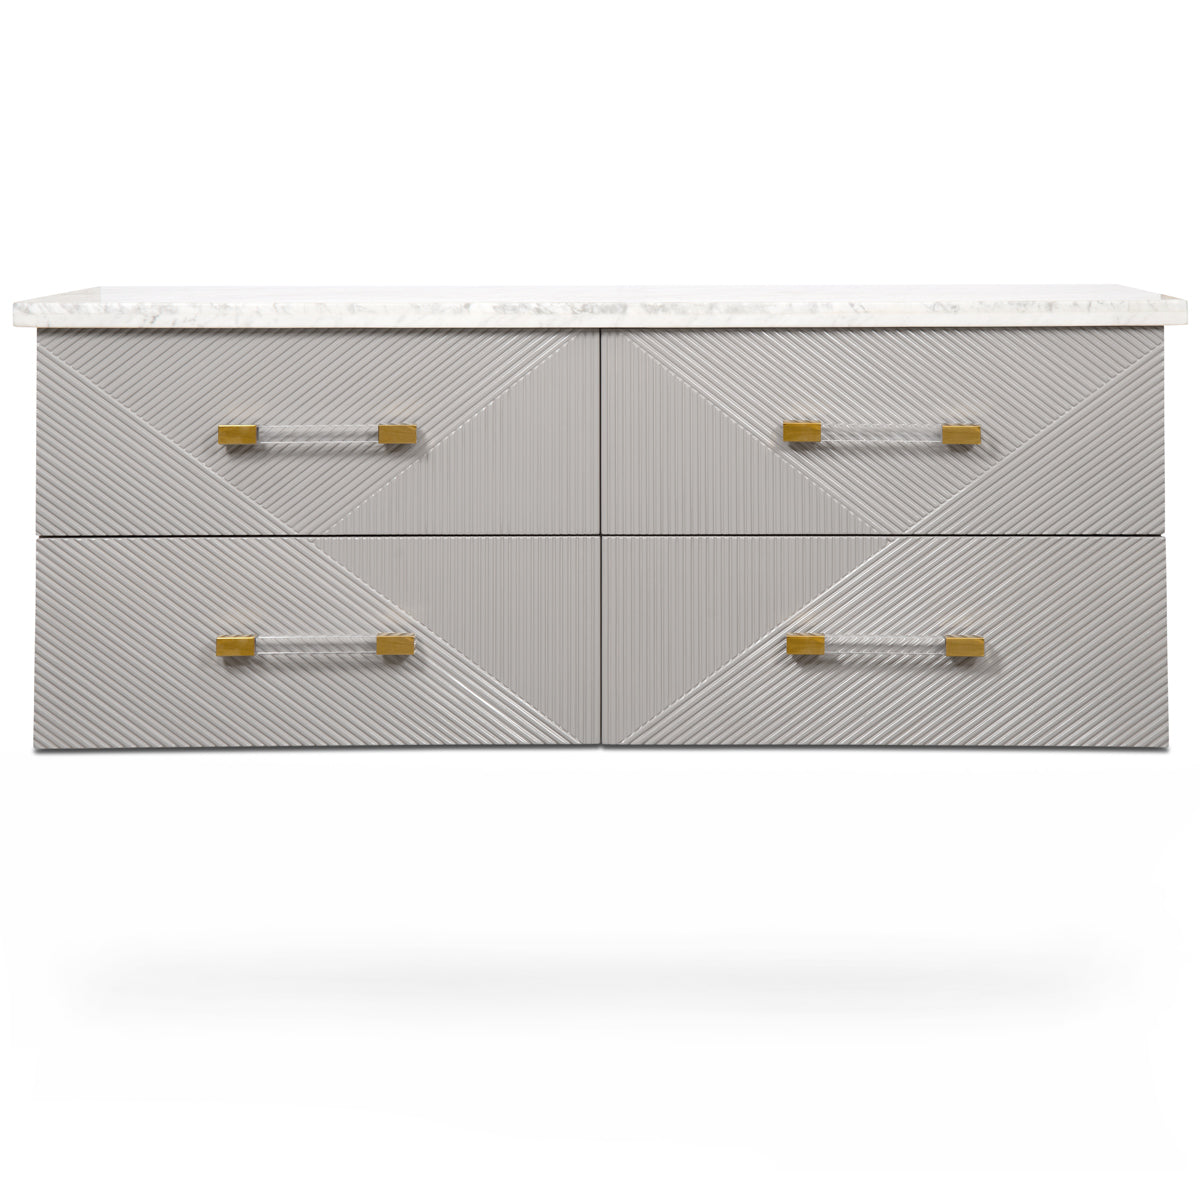 Double vanity with four drawers, Lucite and brass drawer pulls, a light marble top and a textured gray front.